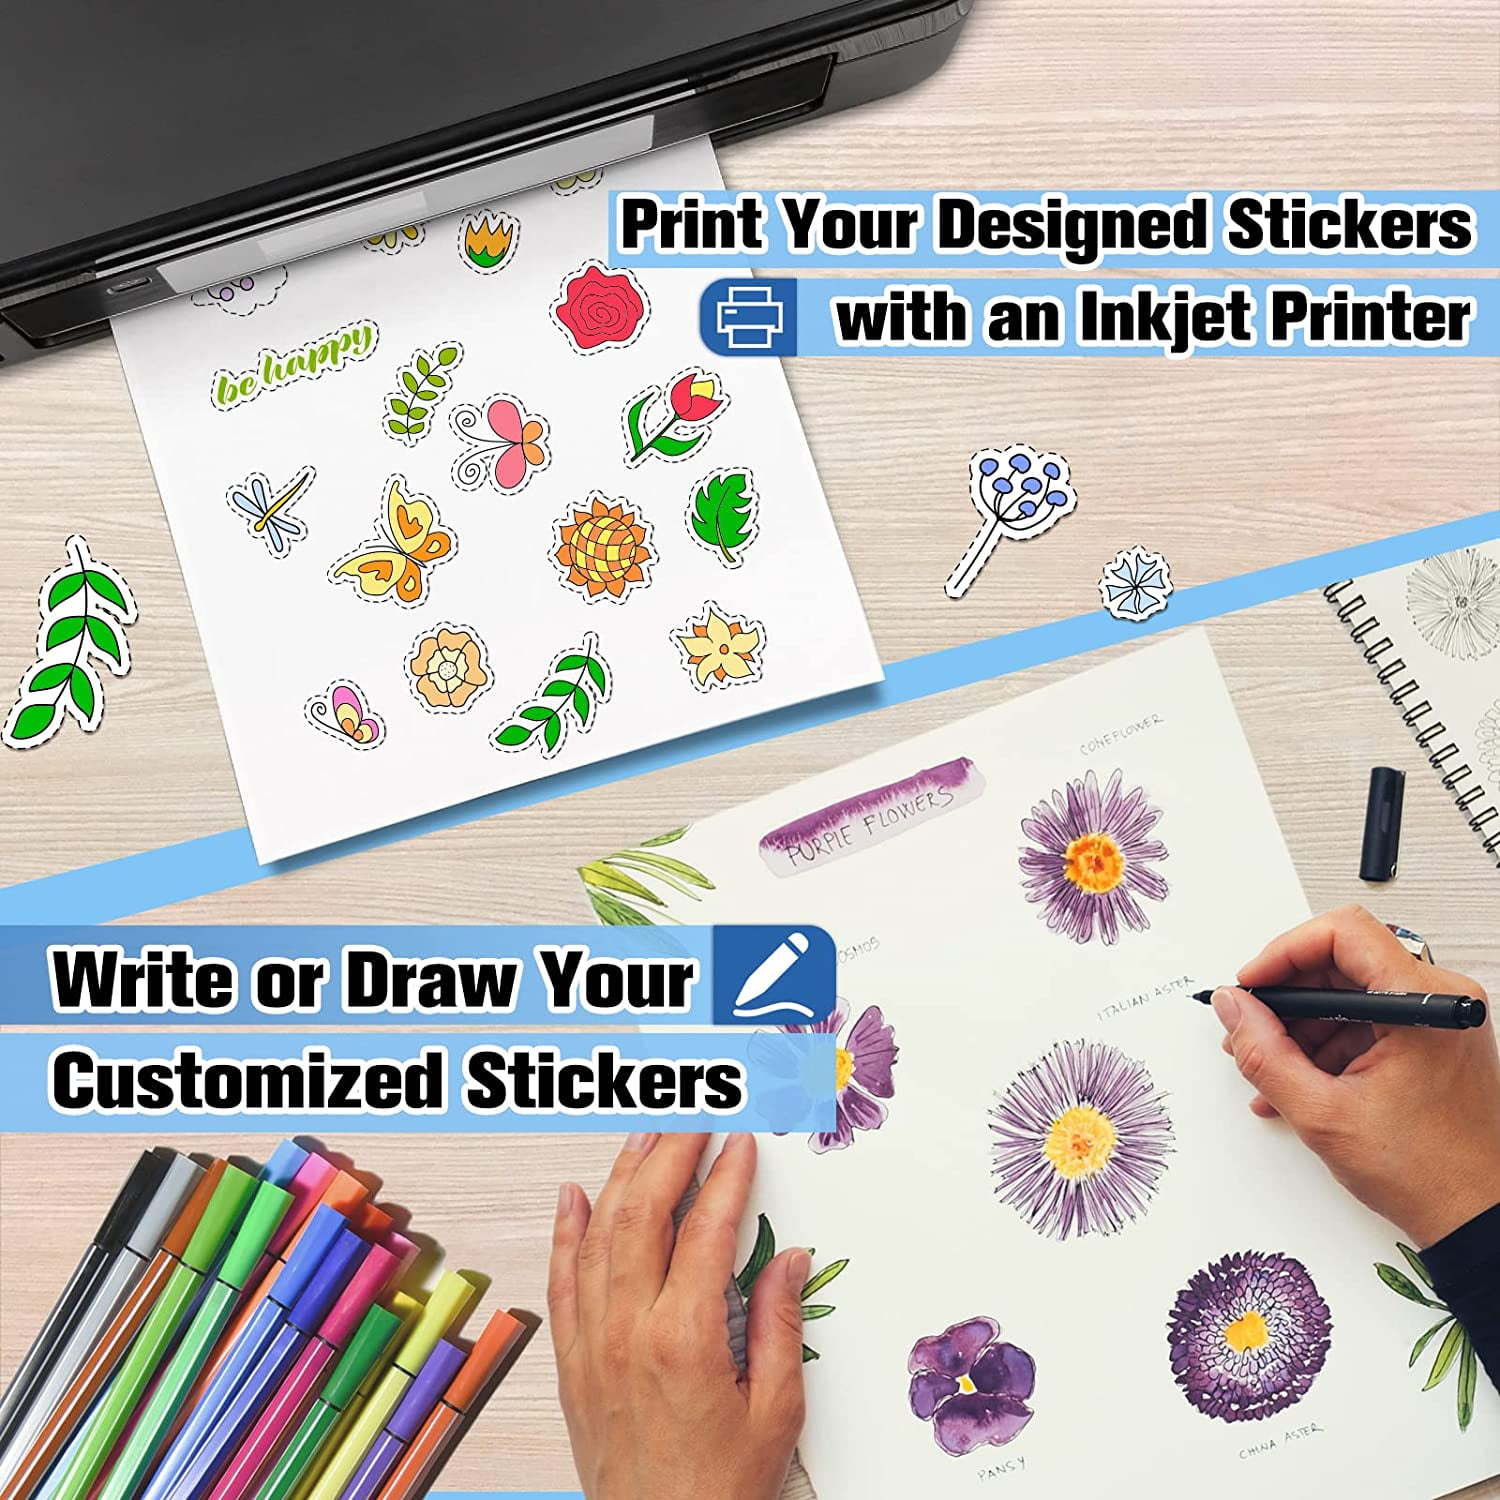 Print your artwork on US 21 label sheets